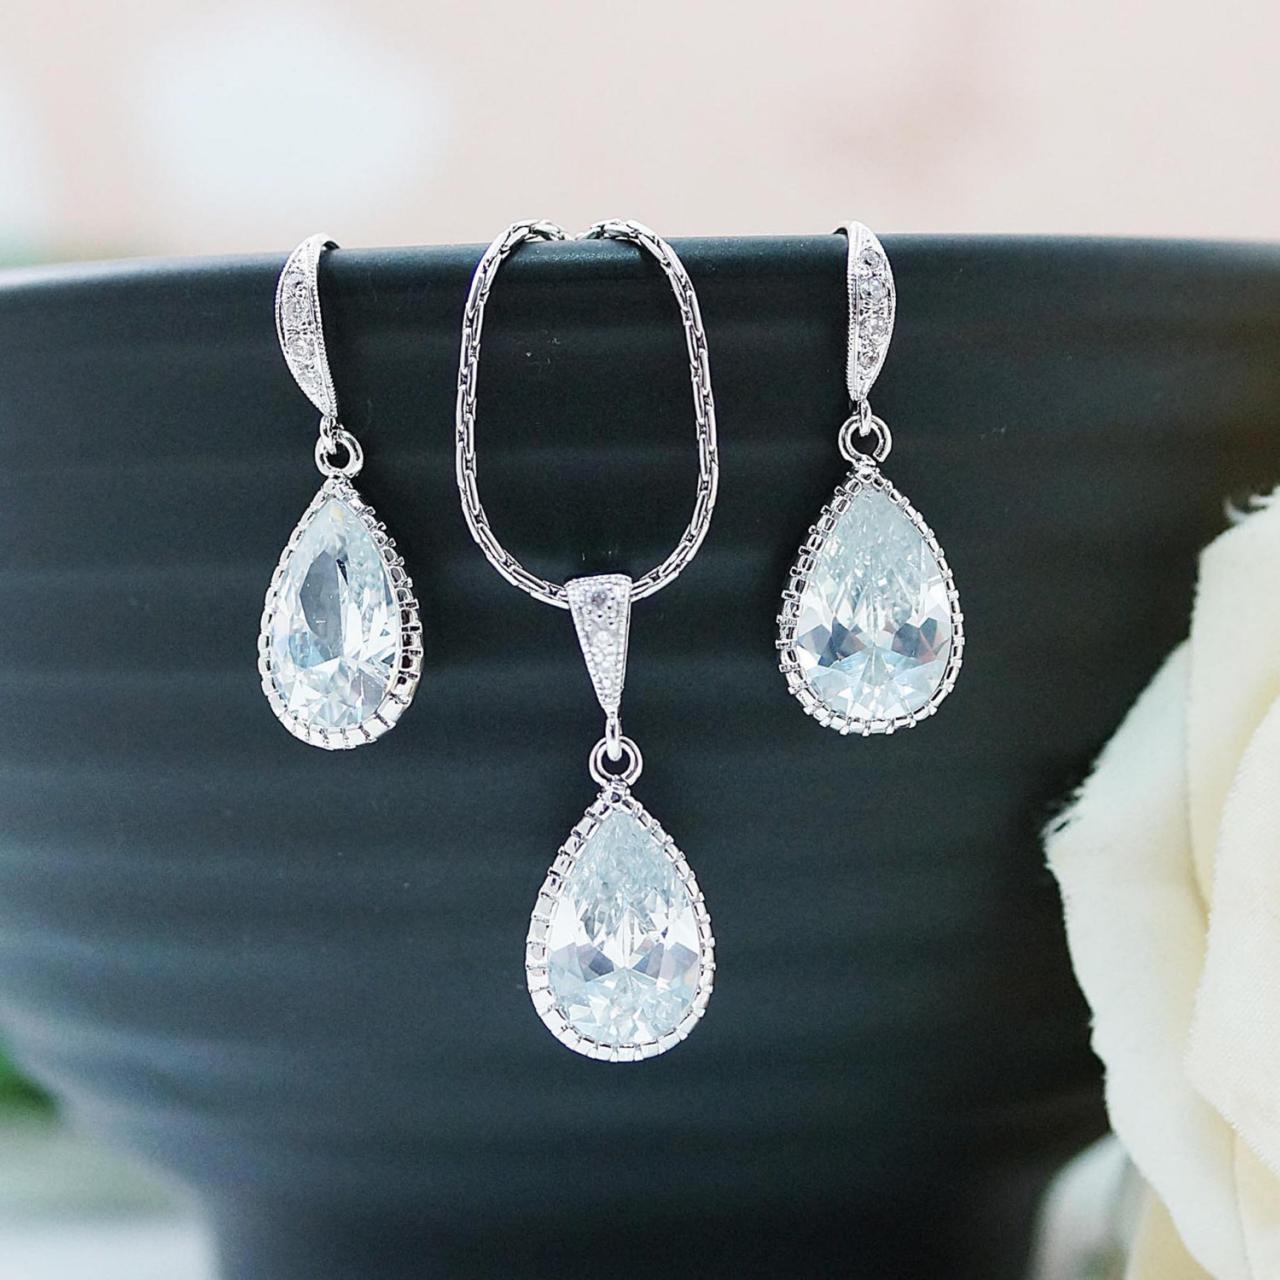 Wedding Jewelry Bridal Jewelry Bridal Earrings Bridal Necklace Clear White Large Cubic Zirconia Tear drops Bridal Jewelry Set